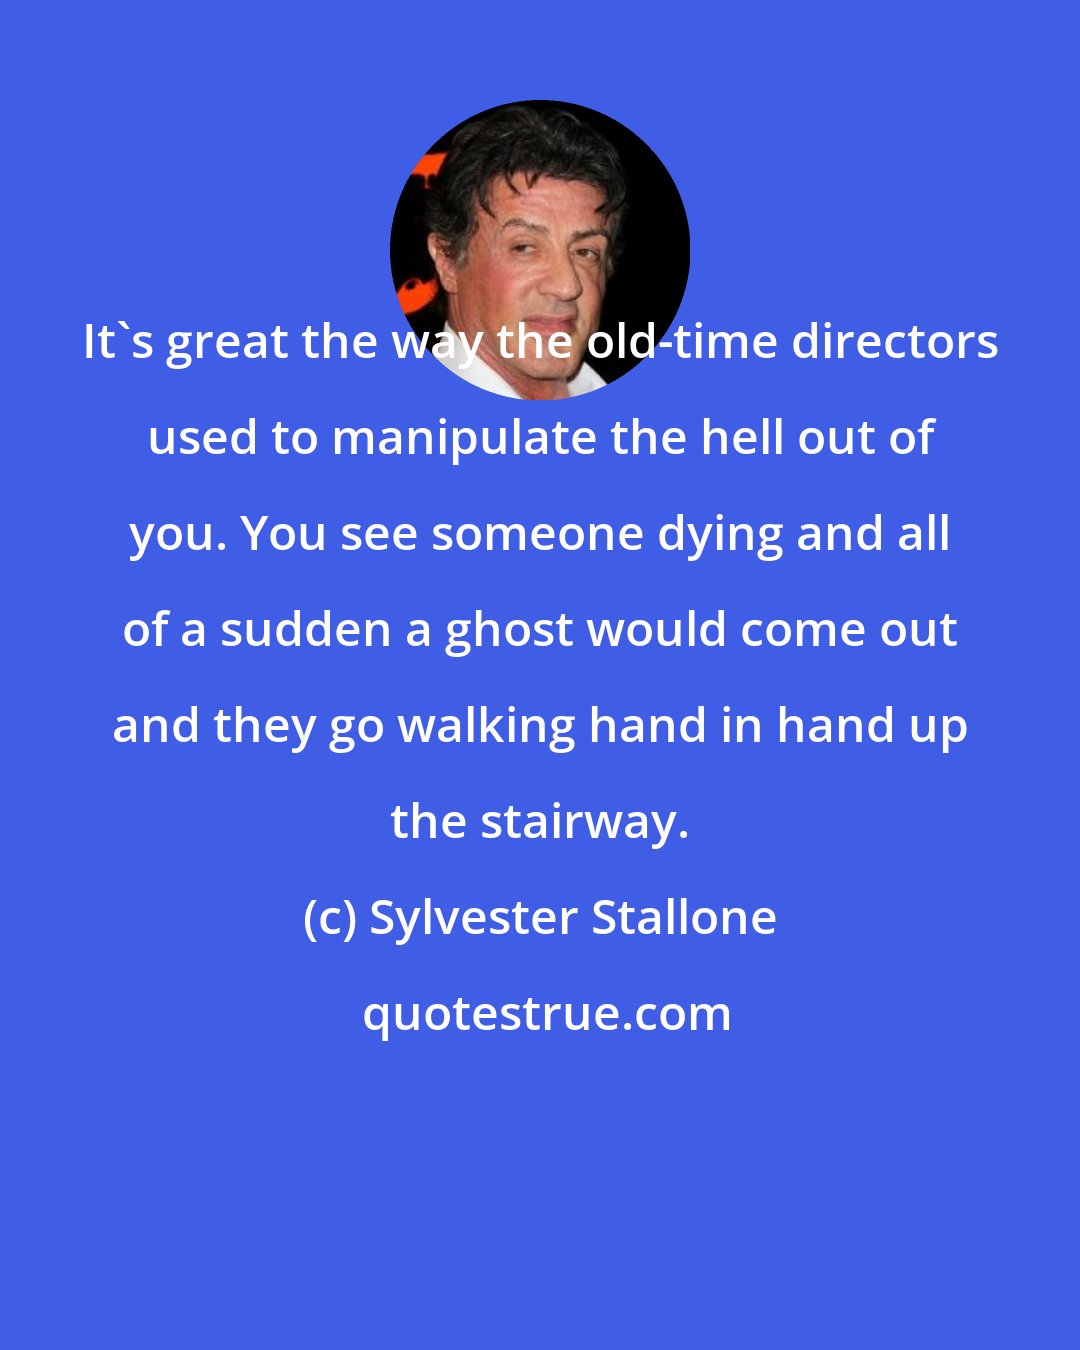 Sylvester Stallone: It's great the way the old-time directors used to manipulate the hell out of you. You see someone dying and all of a sudden a ghost would come out and they go walking hand in hand up the stairway.